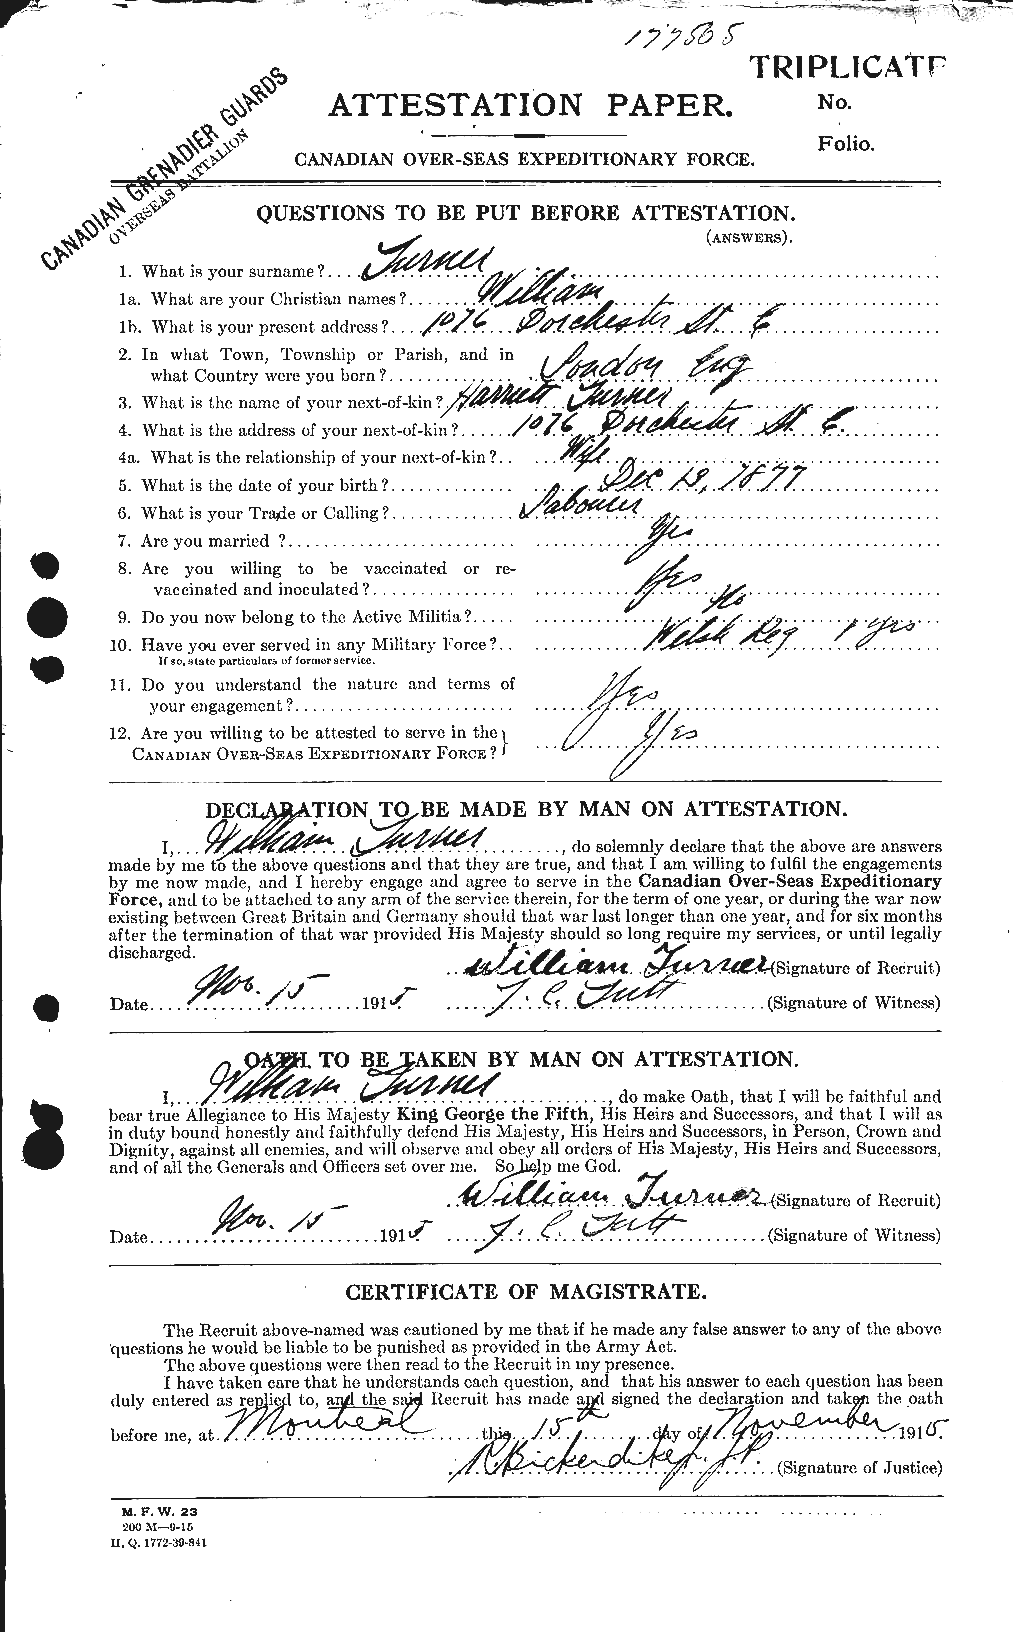 Personnel Records of the First World War - CEF 643996a